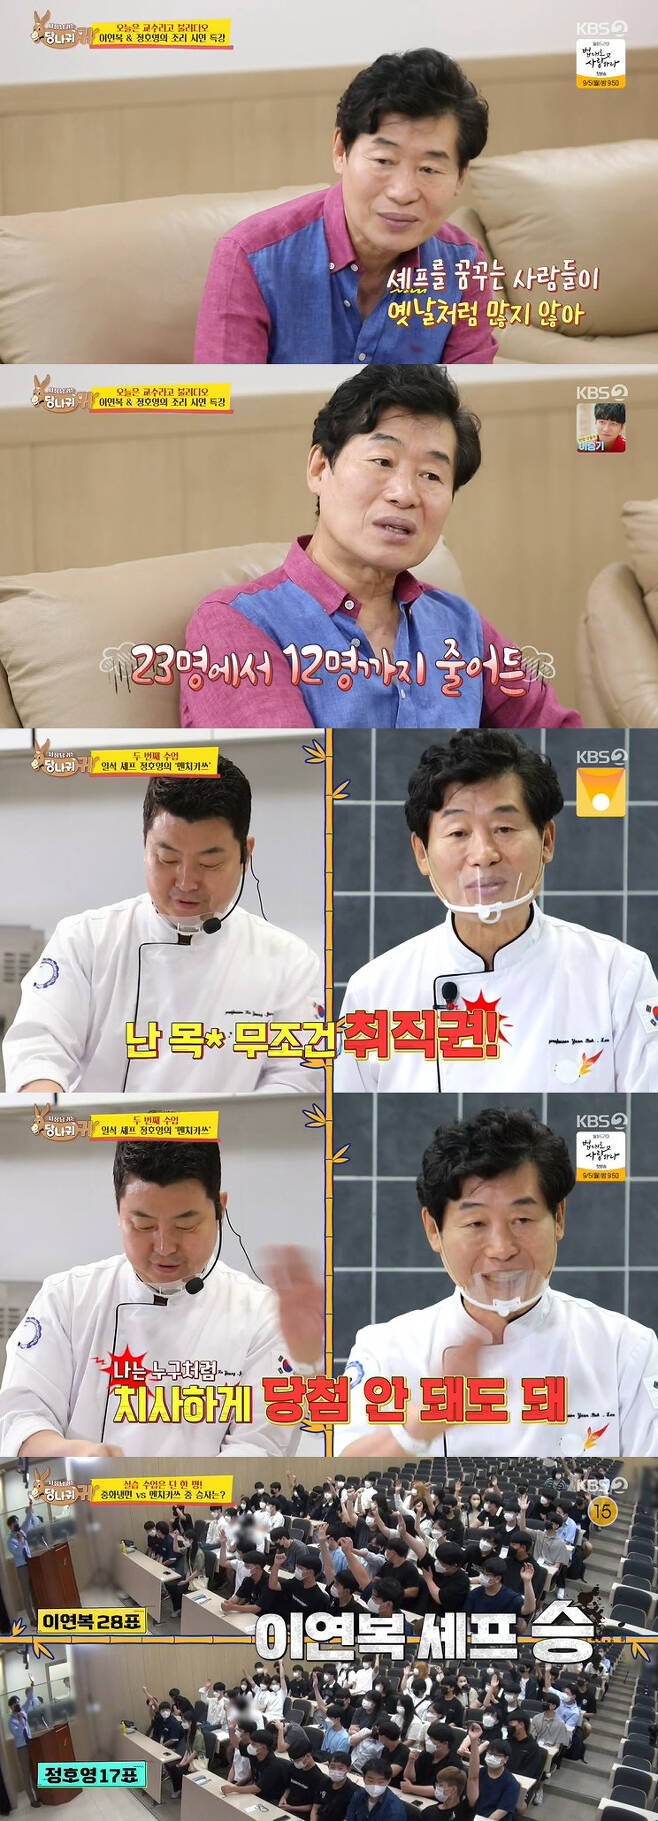 The first appearance of Donkey Ear Jean Pizu was released.In the KBS2 entertainment program Boss in the Mirror broadcasted on the 28th, the daily life of Chung Young-joon, the first comedy label of South Korea, was revealed.Chung Young-joon has formed the first comedy label in South Korea through several entertainment companies.Lee Chang-ho and Kwak Beom, who came out as guests to support Chung Young-joon, said, I came out of college in the United States to boast about my representative.Chung Young-joon, a former Ohio State University student, said, I have a school year, and Jun Hyun-moo is a junior at high school.The army also came out of Katusa, he said, welcoming Jun Hyun-moo.I think I focused too much when I was working, I usually work 80 hours a week and as many as 100 hours a week, said Chung Young-joon, who seemed to have a severe dark circle.Lee Chang-ho and Kwak Beom, a member of Metacomedy and YouTube Channel Bread Song Bureau, were KBS bond comedians.The two of them said, The Gag Concert is gone and I think it will be good if Young Jun does the video on YouTube while performing.Thats how I started, he said.After the meeting and filming, Chung found the studio in Jiang Pizu, the oldest member of the meta-comidi and the pillar.There are 3.27 million subscribers, and each time they renew, the number of subscribers increases by 10,000.Before youTube, I did a jujube Vic-Fezensac, and I wanted to promote jujube, so I made a video and then I did it so far, Chung said.Finally, the first appearance of Jean-Pizou, but the face was covered and I was sorry for the steaming fan Jun Hyun-moo.Chung Young-joon said, At first, I was ashamed and did not disclose it, but I have not been able to disclose my face for about six years.Kim Sook asked, If you achieve 4 million subscribers, how about releasing your face? Chung Young-joon said, I will talk about it.Chung Young-joon, who had maintained his expressionless expression until now, laughed as soon as he saw the face of Zhang Pizu.Earlier, other employees complained that Chung Young-joon laughs in the order of subscribers and I laugh 3 million times to Jang Pi-ju.However, Jung Young-joon said, It is about five times the bread song country.If you have more, it will be about 10 times. Lee Chang-ho and Kwak Beom admitted that they should laugh.Lee Yeon-bok and Jeong Ho-young will become professors on this day and will give a special lecture on Cooking Park Si-yeon.Lee Yeon-bok said: There are not many people these days who dream of Chef, Vic-Fezensac is good, but there are no people; the staff has been reduced from 23 to 12.I folded it because I just wanted to not be able to do it. Jun Hyun-moo asked Jeong Ho-young why the number of food service applicants is decreasing as they go on, and Jeong Ho-young speculated that it seems to be because of physical difficulty and knife danger.By lecture time, the two had transformed into professional Chefs; Lee Yeon-bok had displayed Chinese noodles and Jeong Ho-young had Menchikatsu.They were tit-for-tat, and they continued to enjoy each other, but when it was Jeong Ho-young Chefs turn, we had tired students.Lee Ho-young and Lee Yeon-bok laughed at the job opening.Park Si-yeon found that there were a lot more students who wanted to learn from Lee Yeon-bok.Jeong Ho-young became an assistant Chef to Lee Yeon-bok and helped him practice Chinese noodles together.